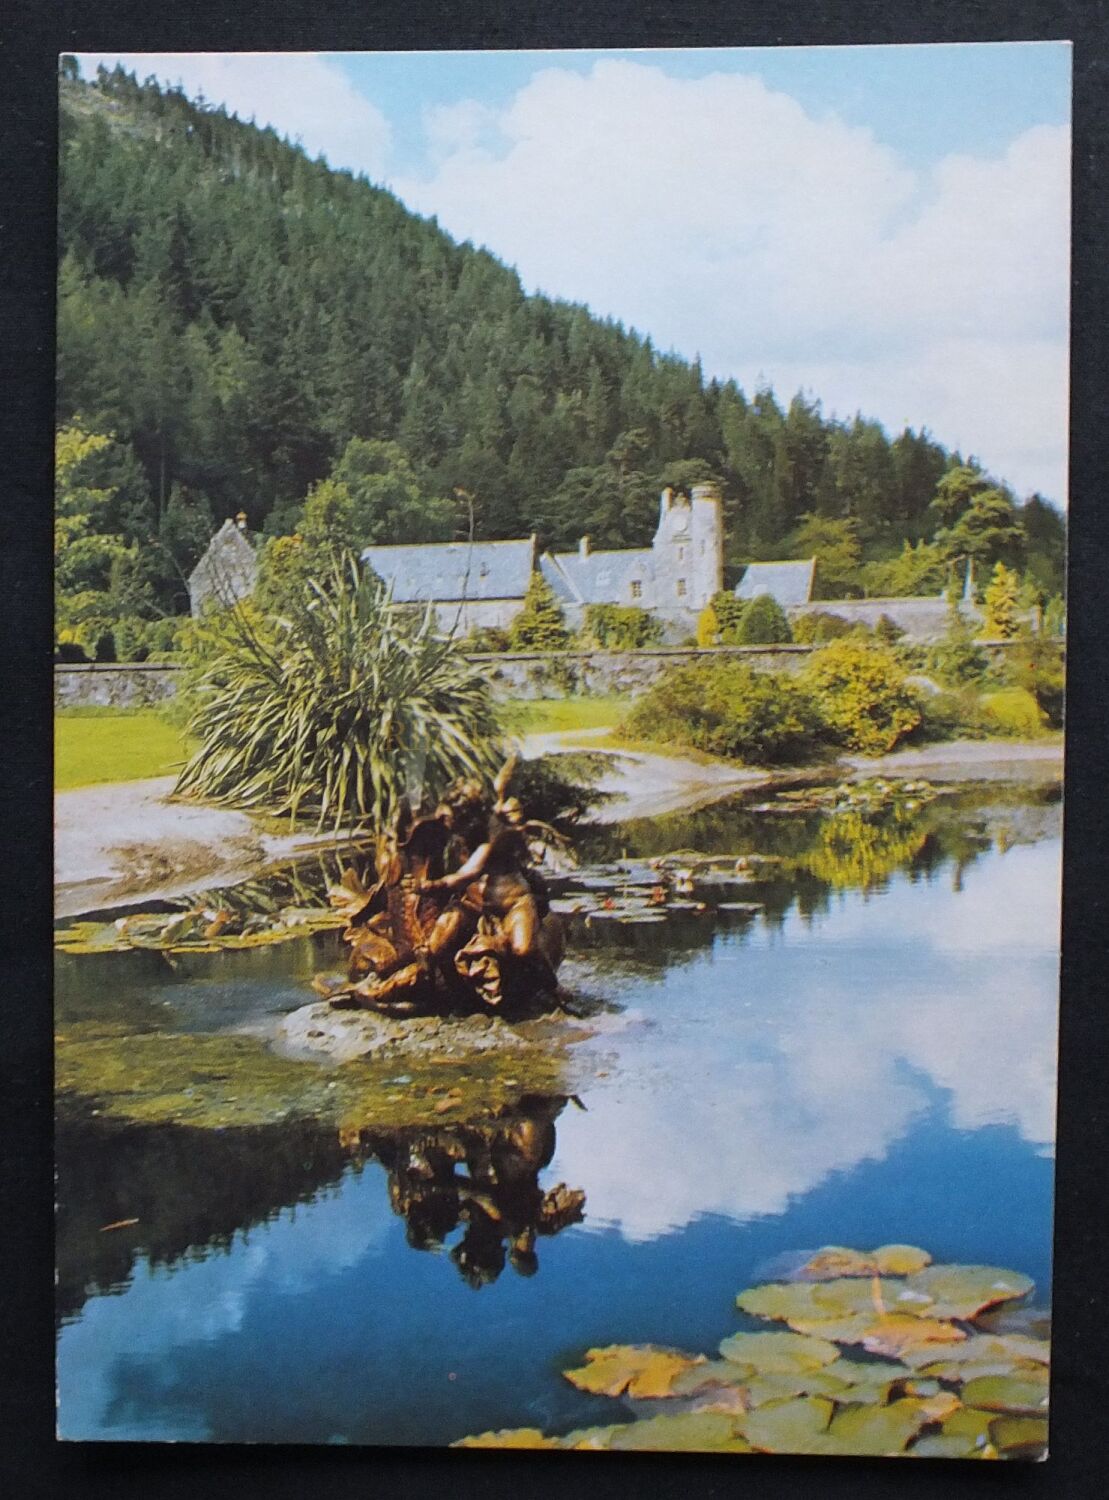 Younger Botanic Gardens, Benmore, Argyll and Bute Scotland-Postcard View Of